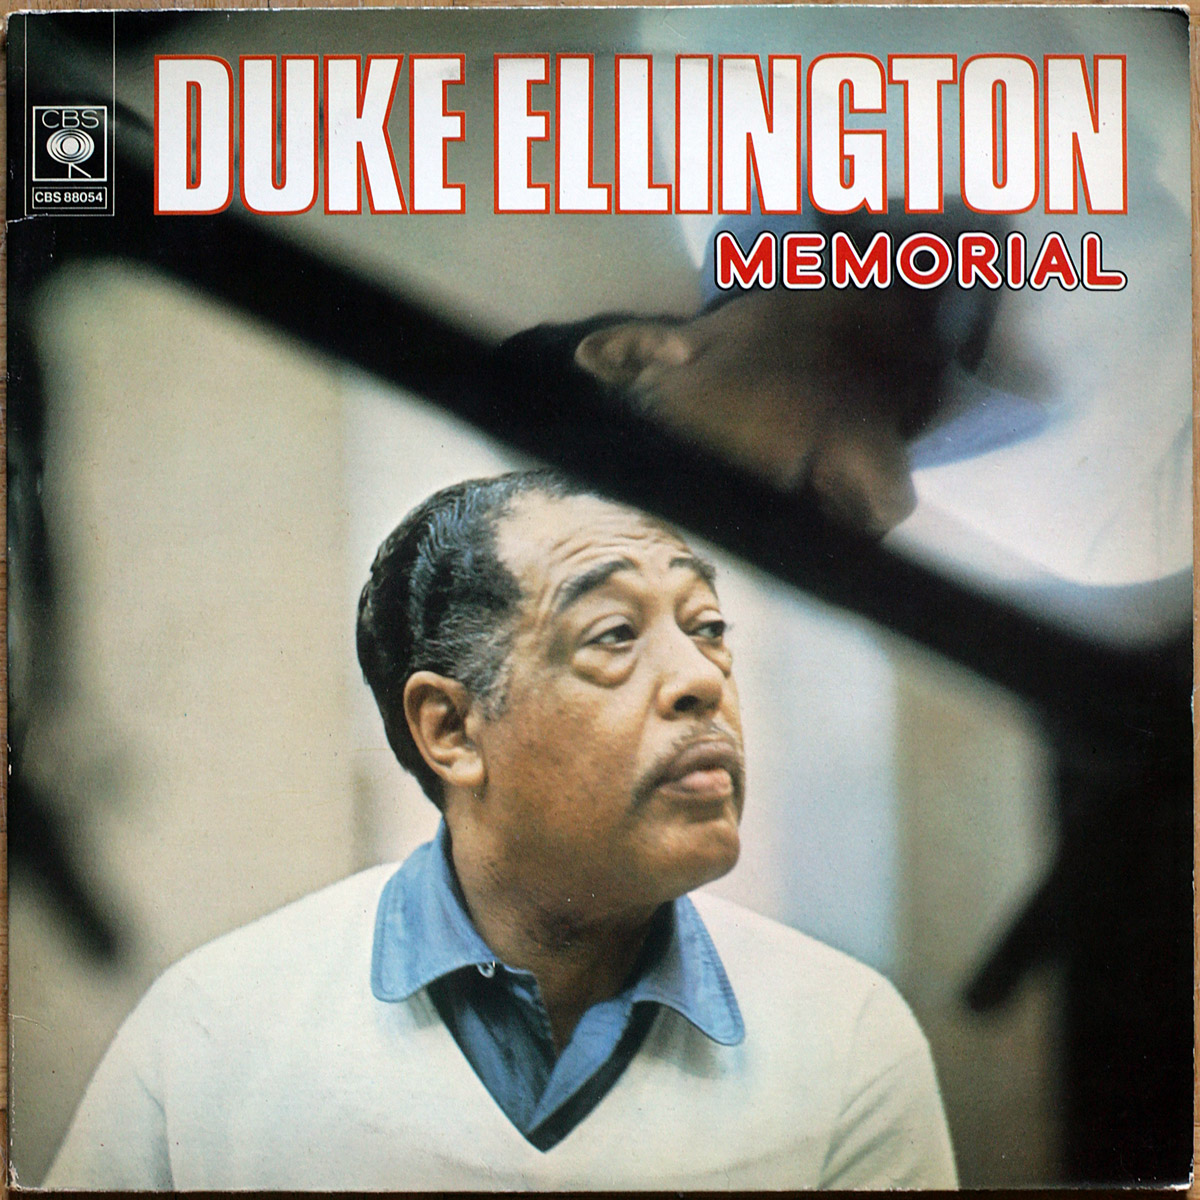 Duke Ellington and his orchestra • Memorial • CBS 88054 • Johnny Hodges • Barney Bigard • Fred Guy • Paul Gonsalves • Ray Nance • Ben Webster • Charlie Rouse • Cat Anderson • Clark Terry